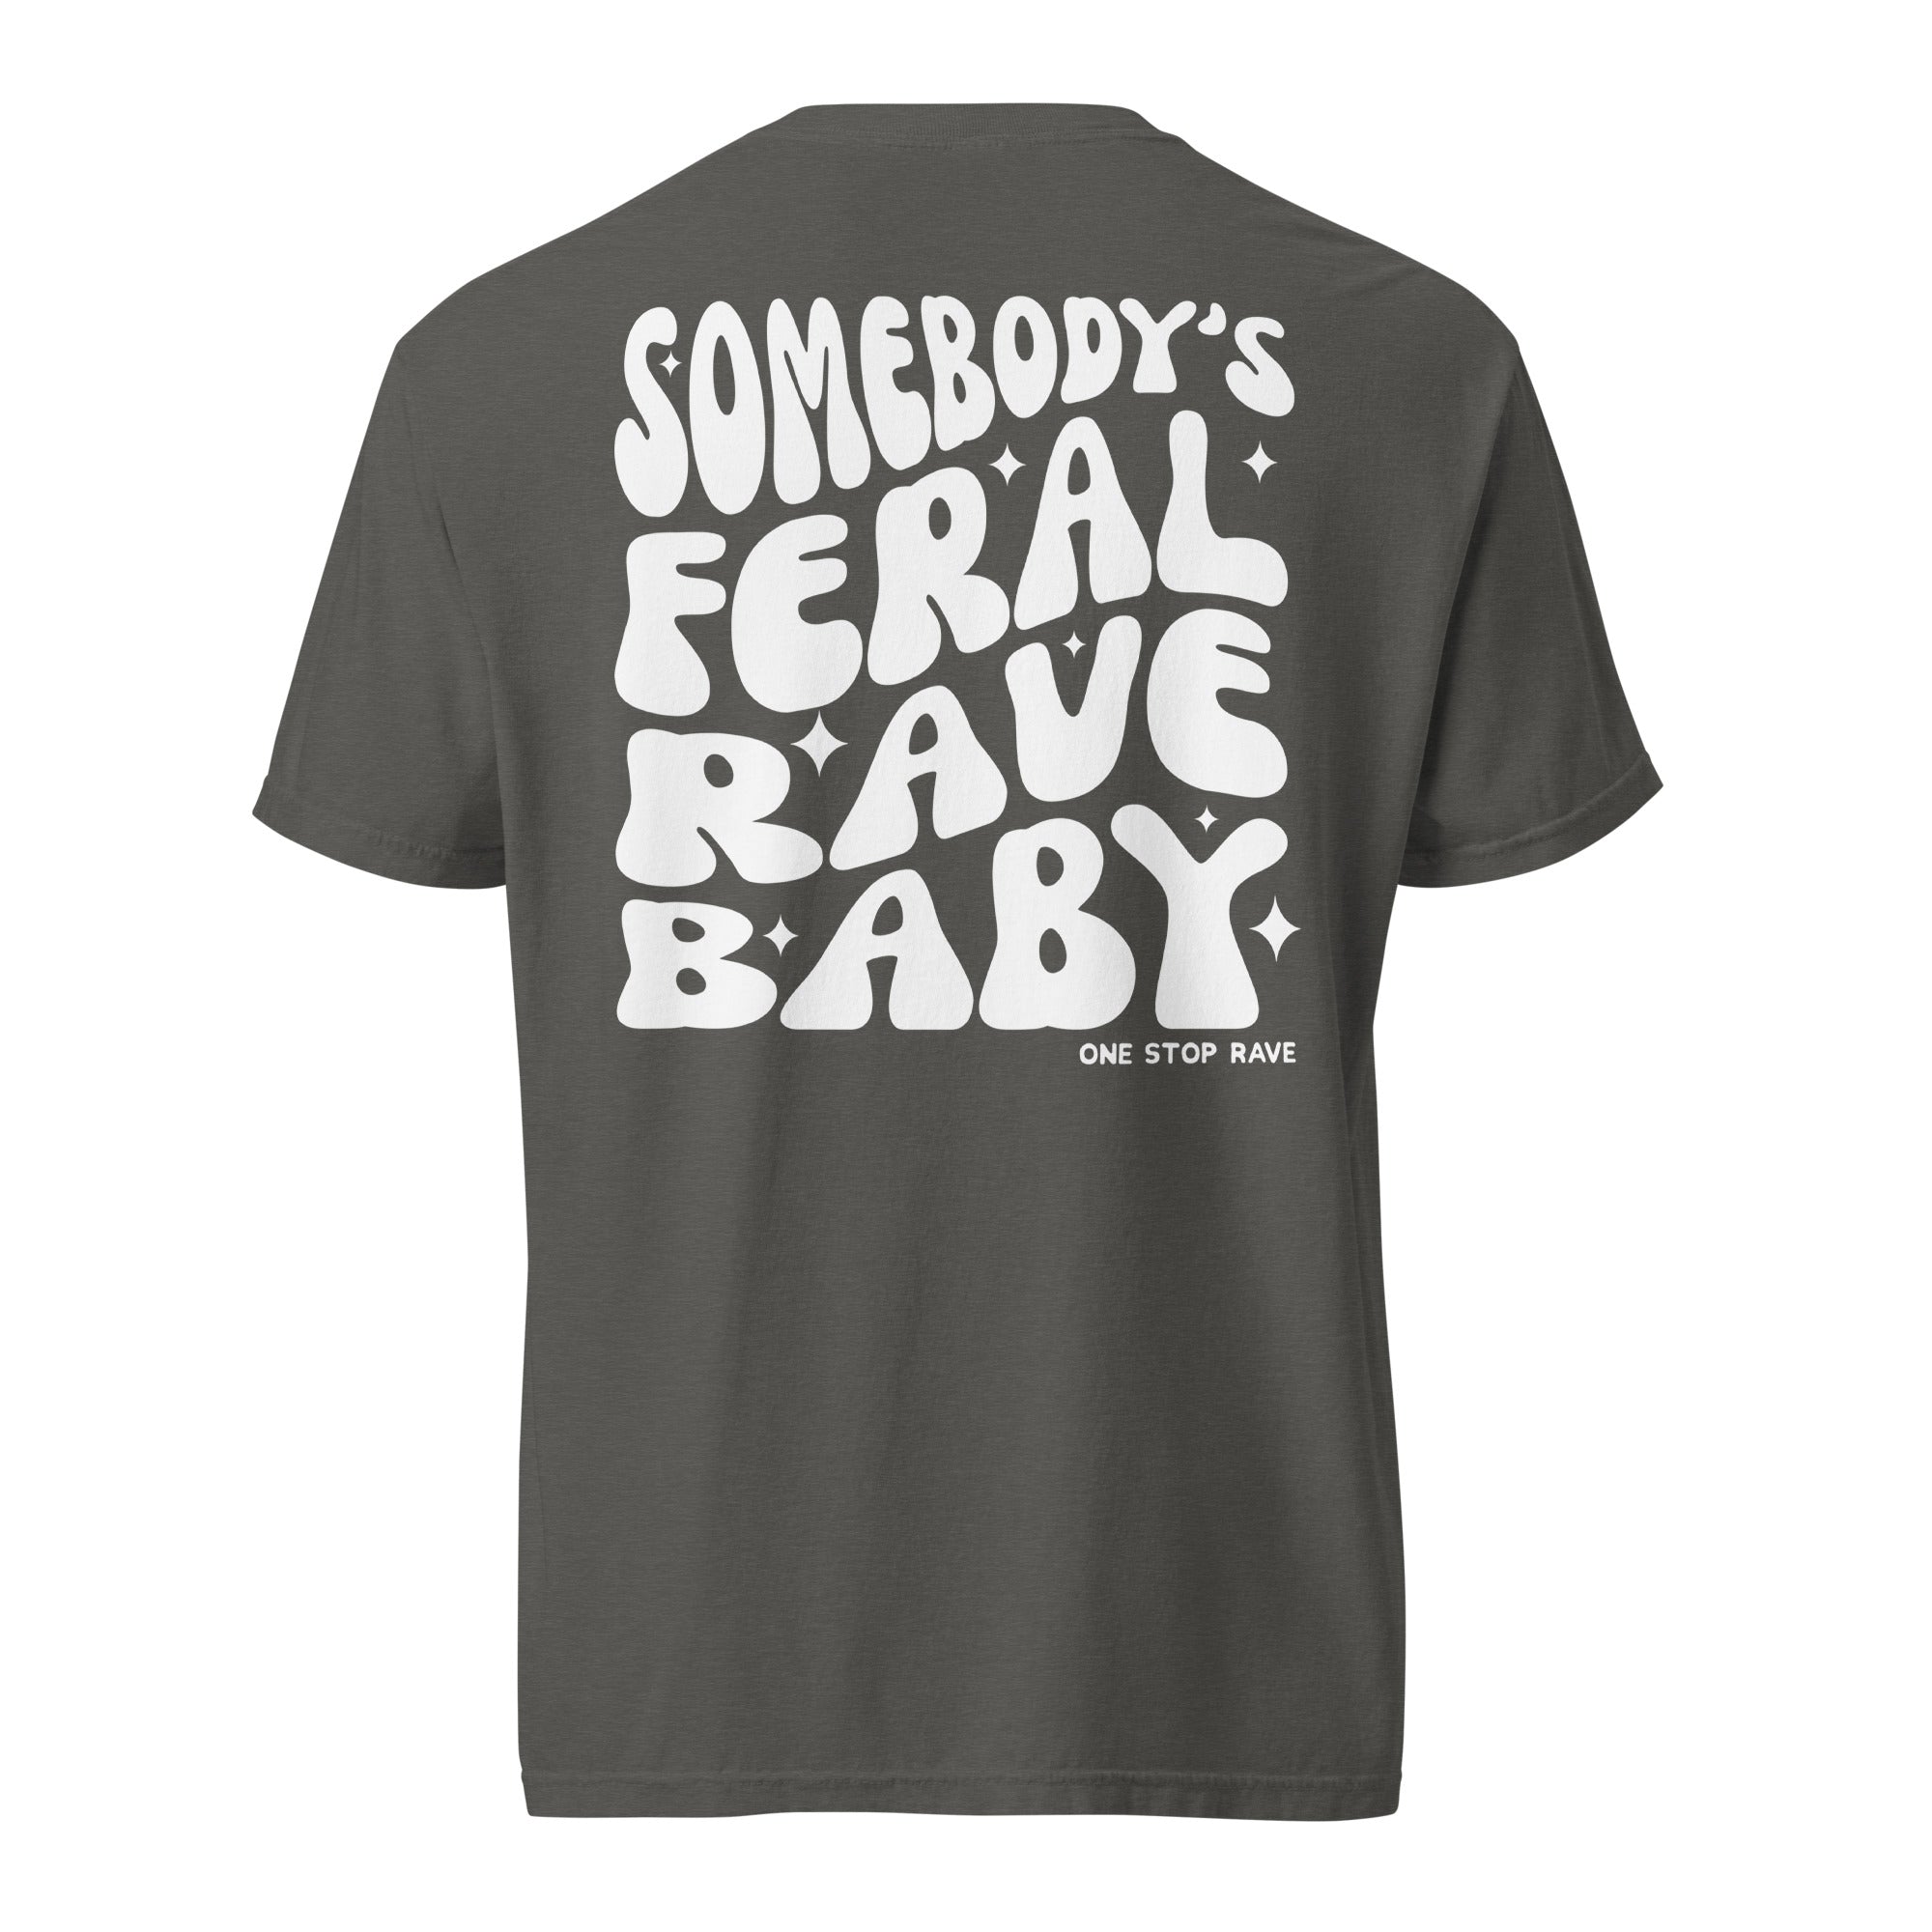 Somebody's Feral Rave Baby T-Shirt